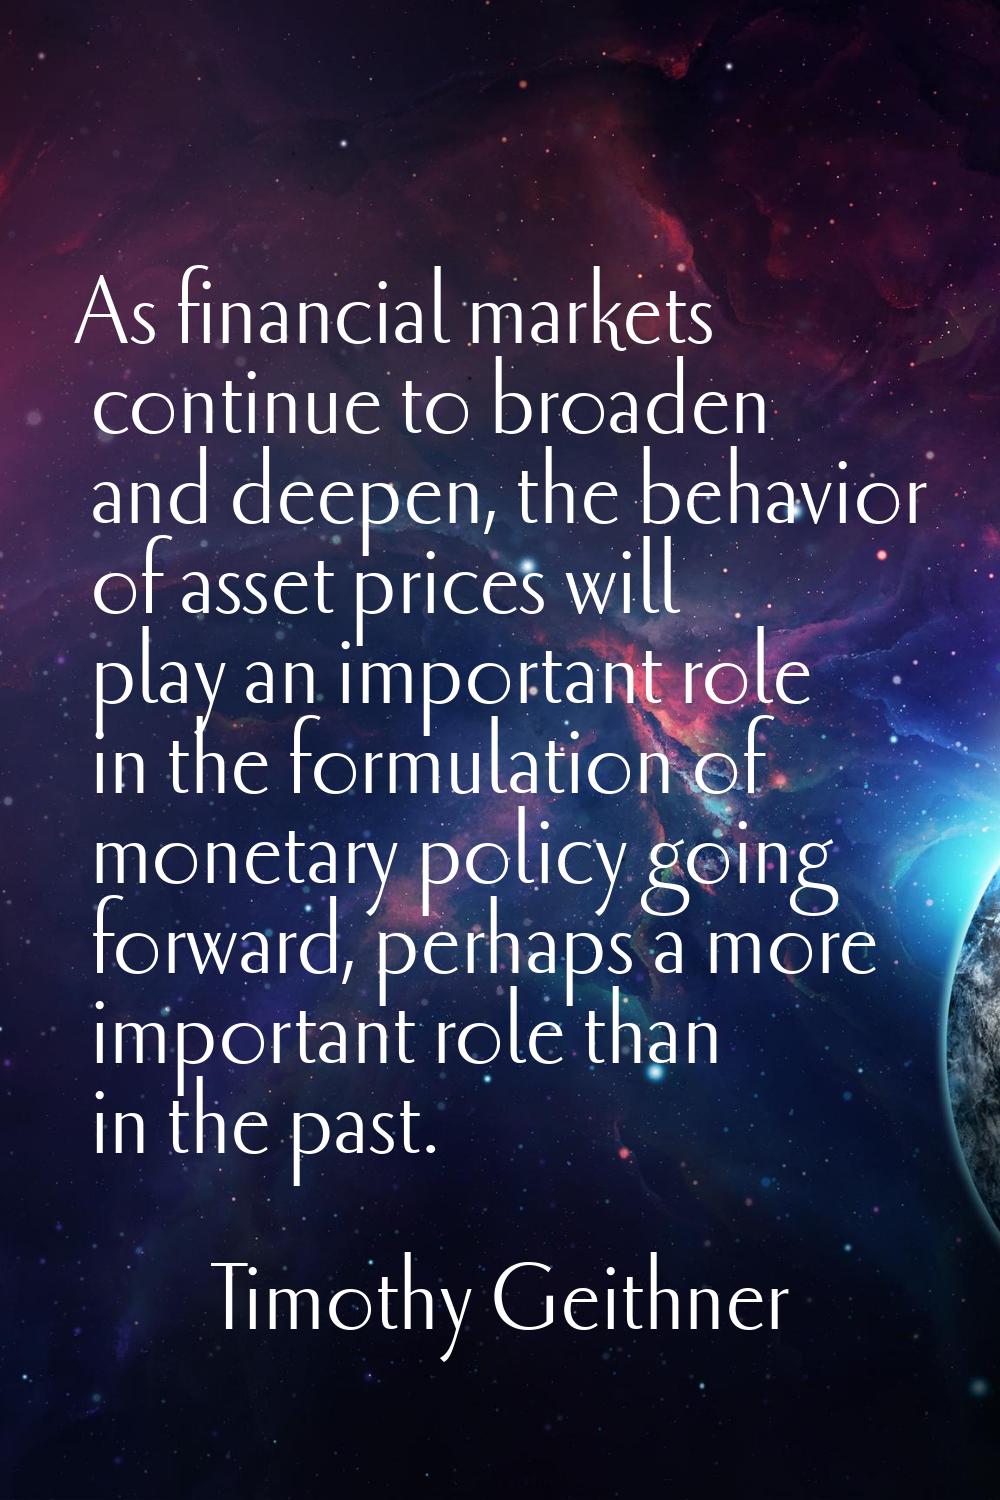 As financial markets continue to broaden and deepen, the behavior of asset prices will play an impo